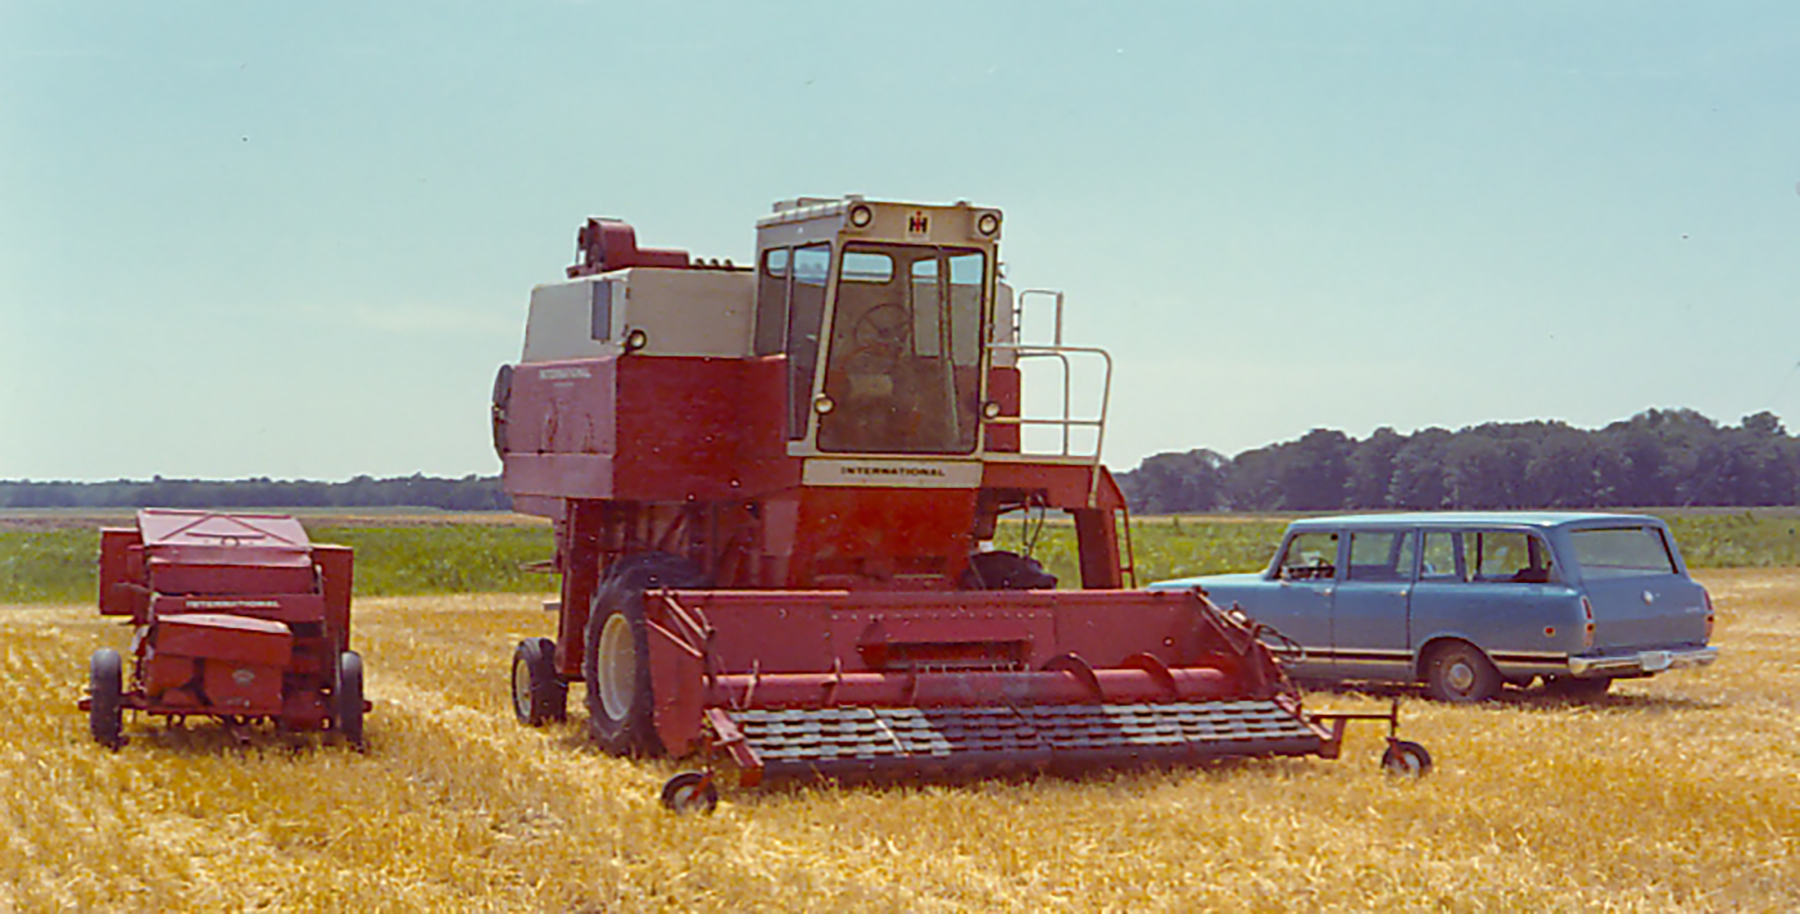 Early Axial Flow Combine being tested in Aberdeen, South Dakota in July 1970